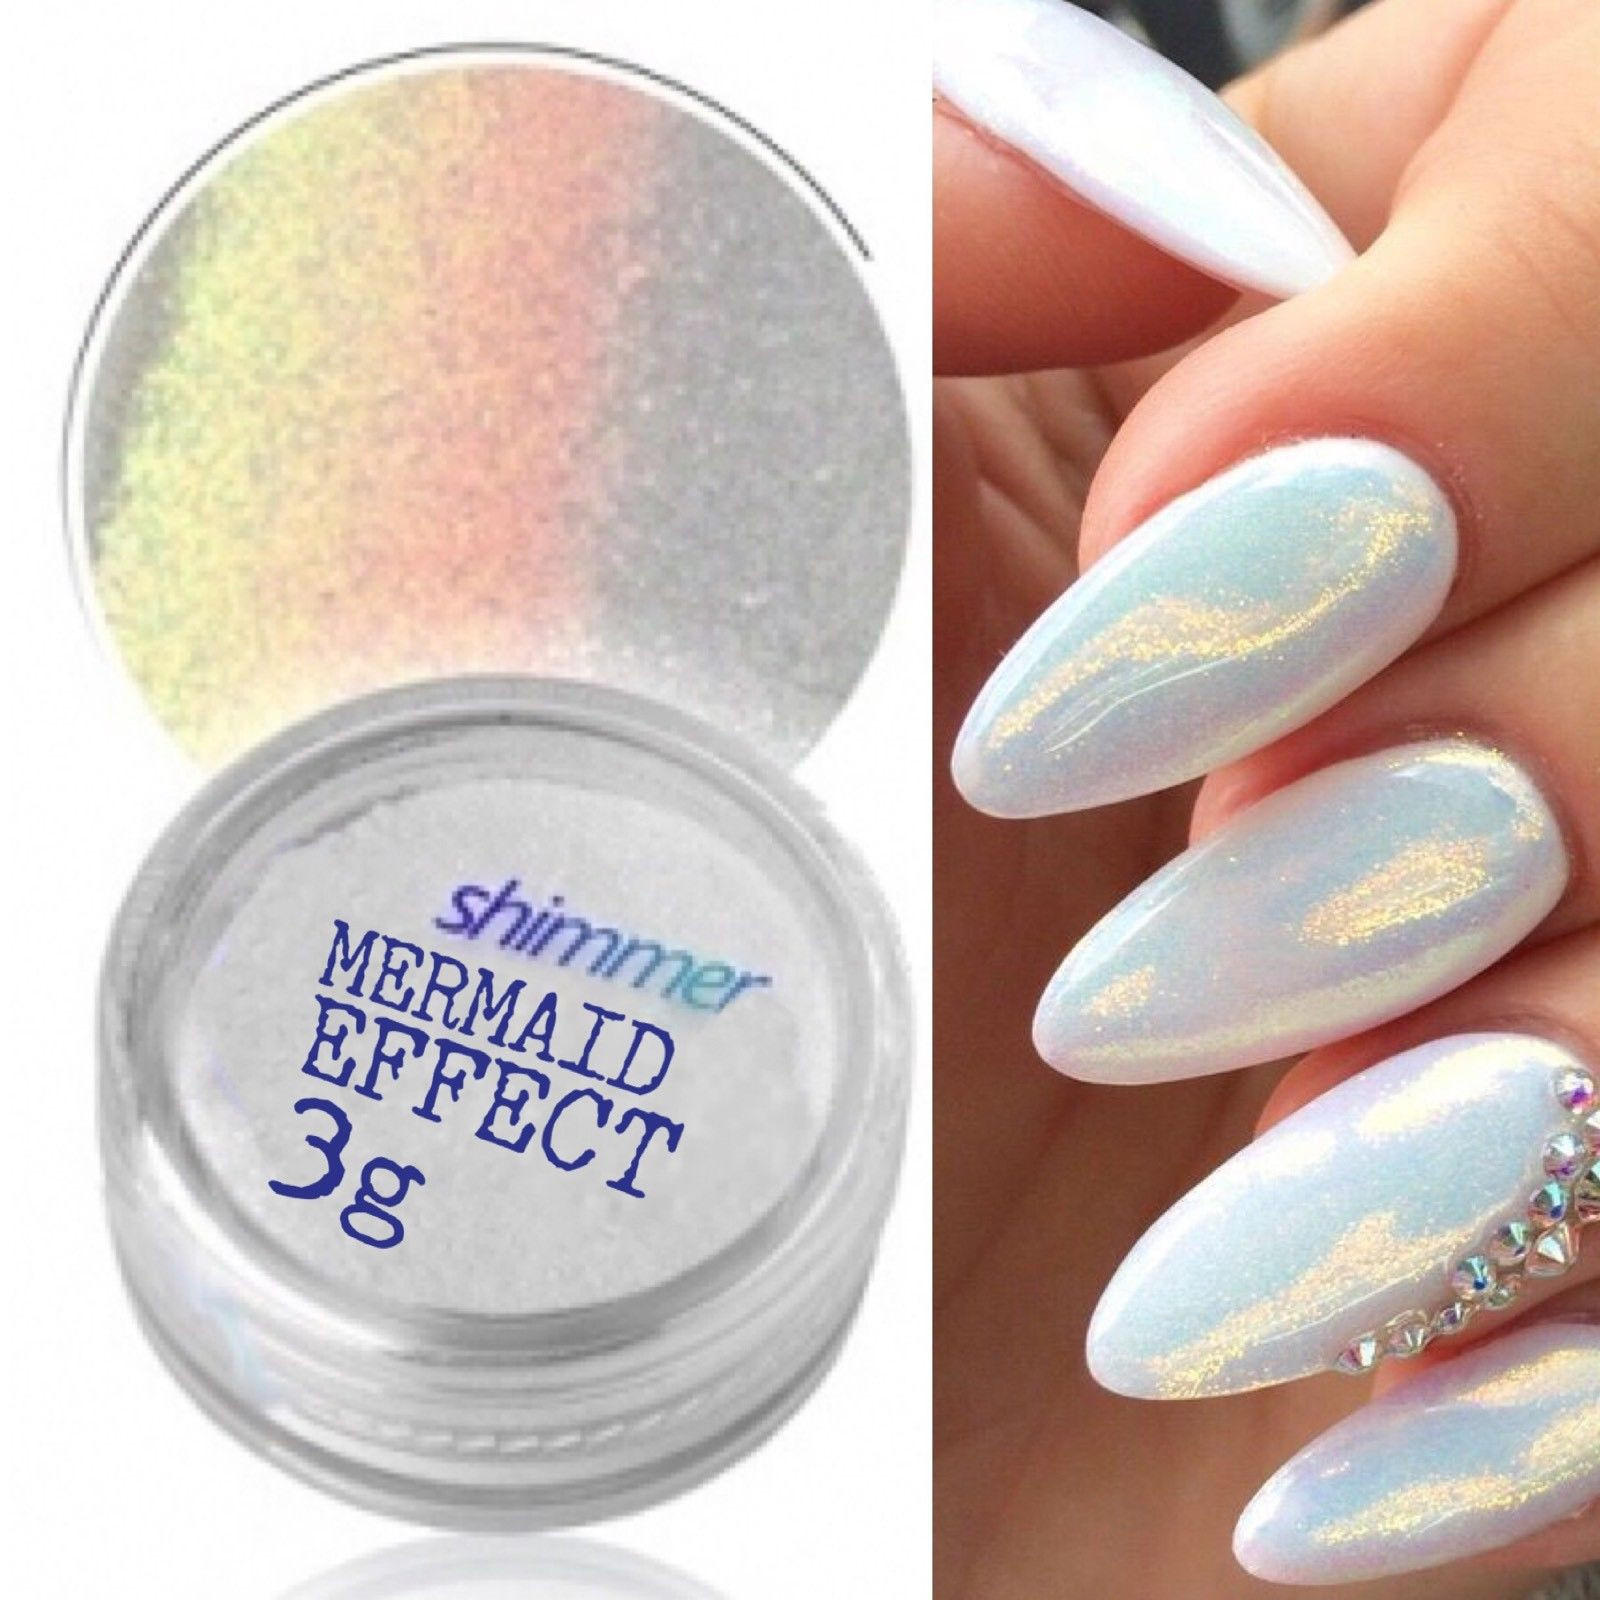 How To Apply Glitter Dust To Nails
 MERMAID EFFECT GLITTER NAIL ART POWDER DUST GLIMMER Hot